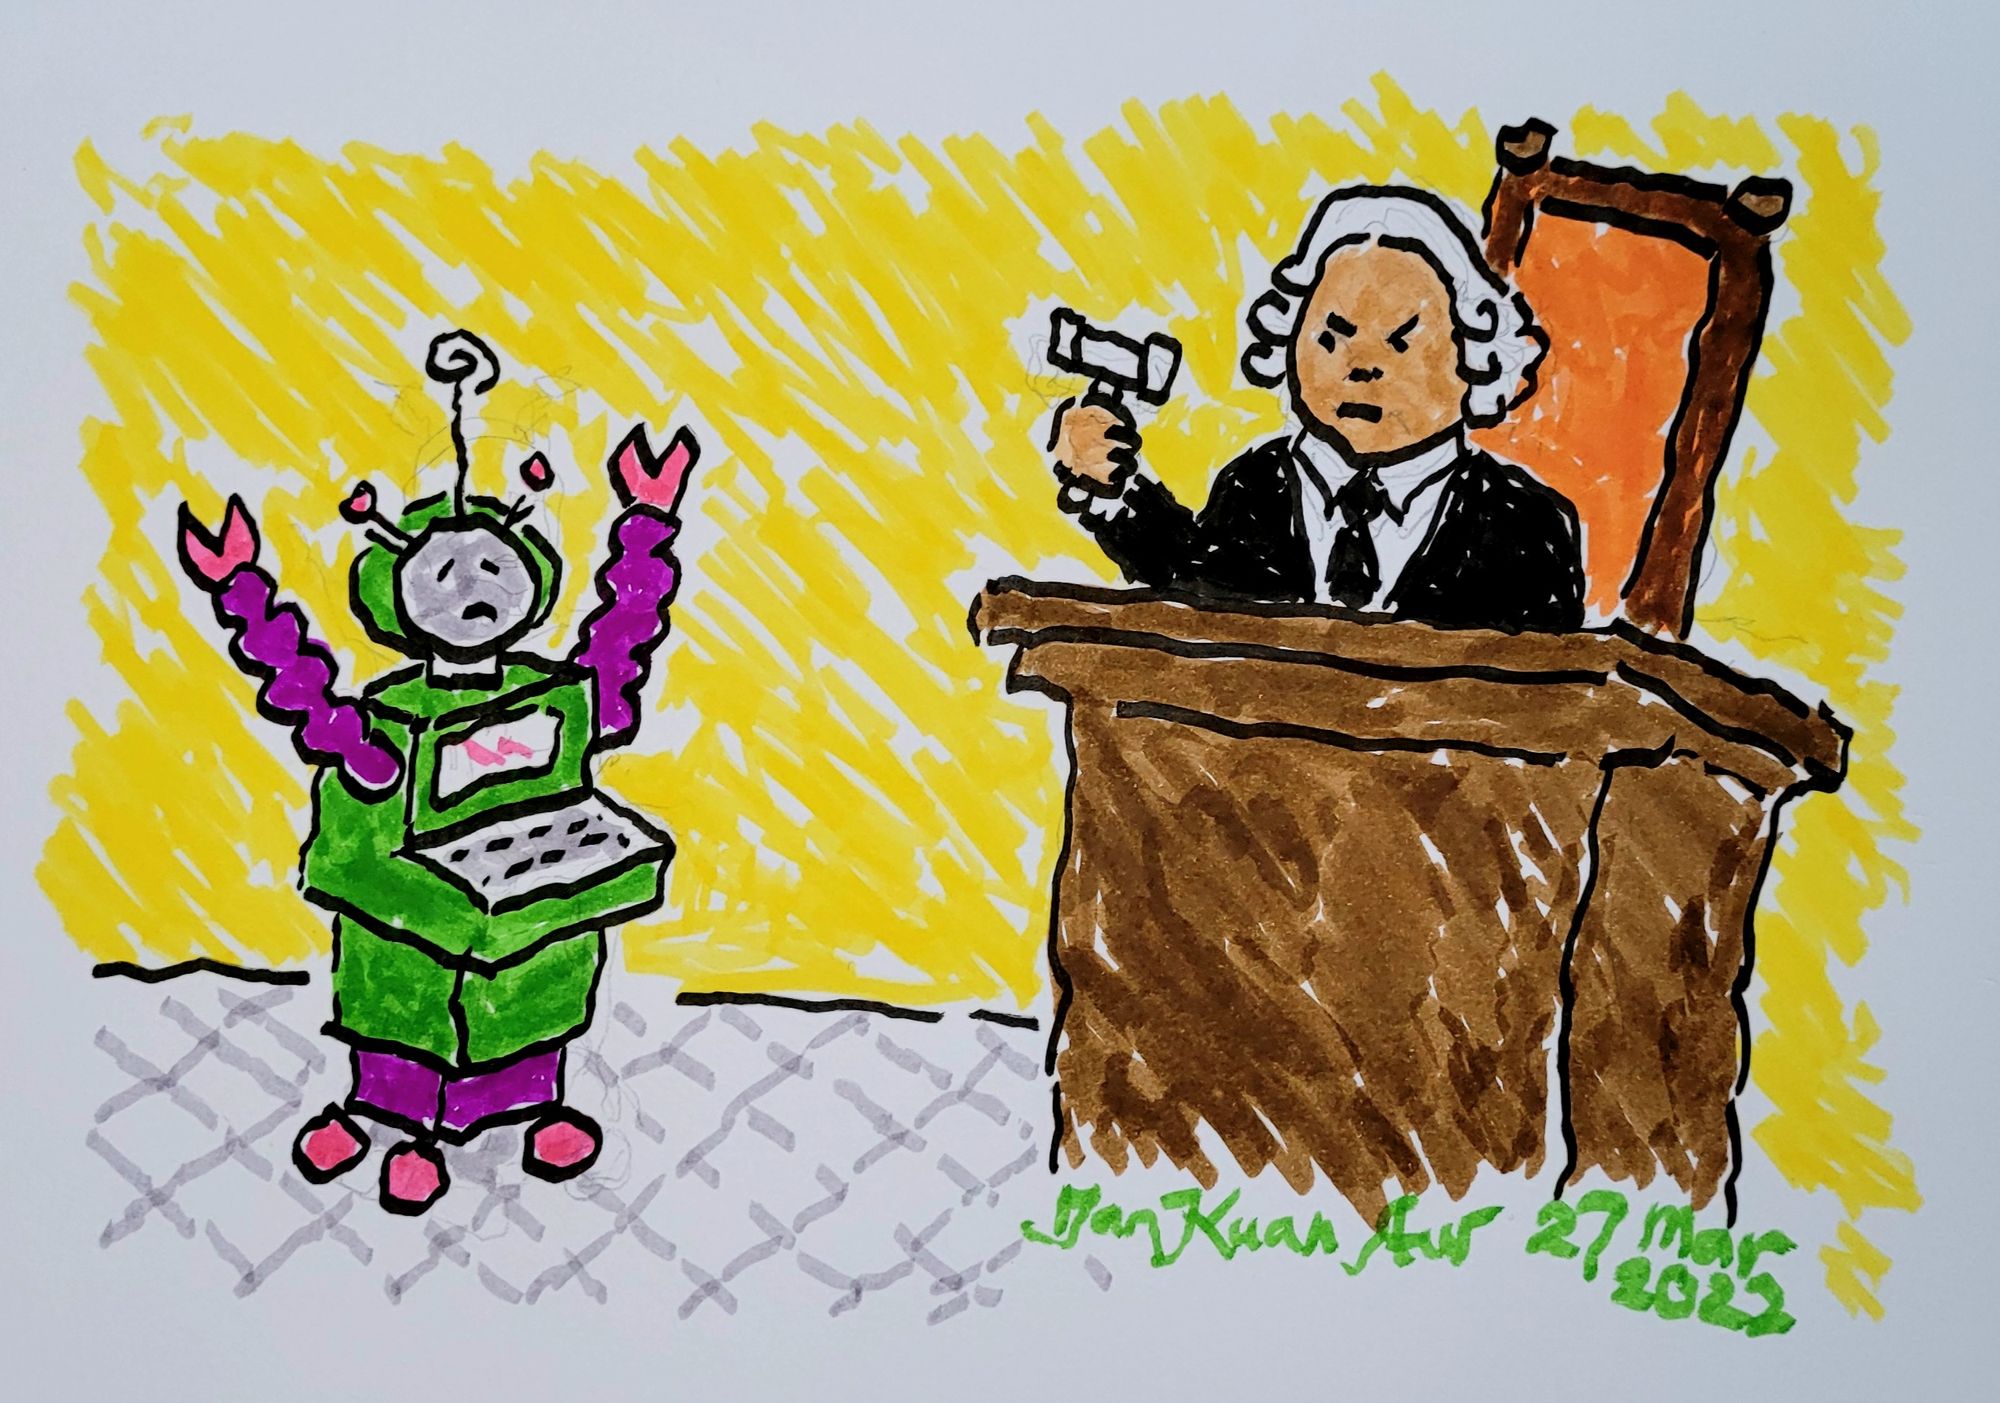 Artistic representation, a watercolour showing a judge sentencing a robot with its hands up in surrender. The robot is made of green boxes, in the style of a desktop interface, with purple clawed arms, hands, antenna and wheeled base. The judge, on a big chair and behind a lectern, holds his mallet and scowls. The judge has brown skin, white wig and is wearing a black suit. Signed Tan Kuan Aw, 27 Mar 2022.